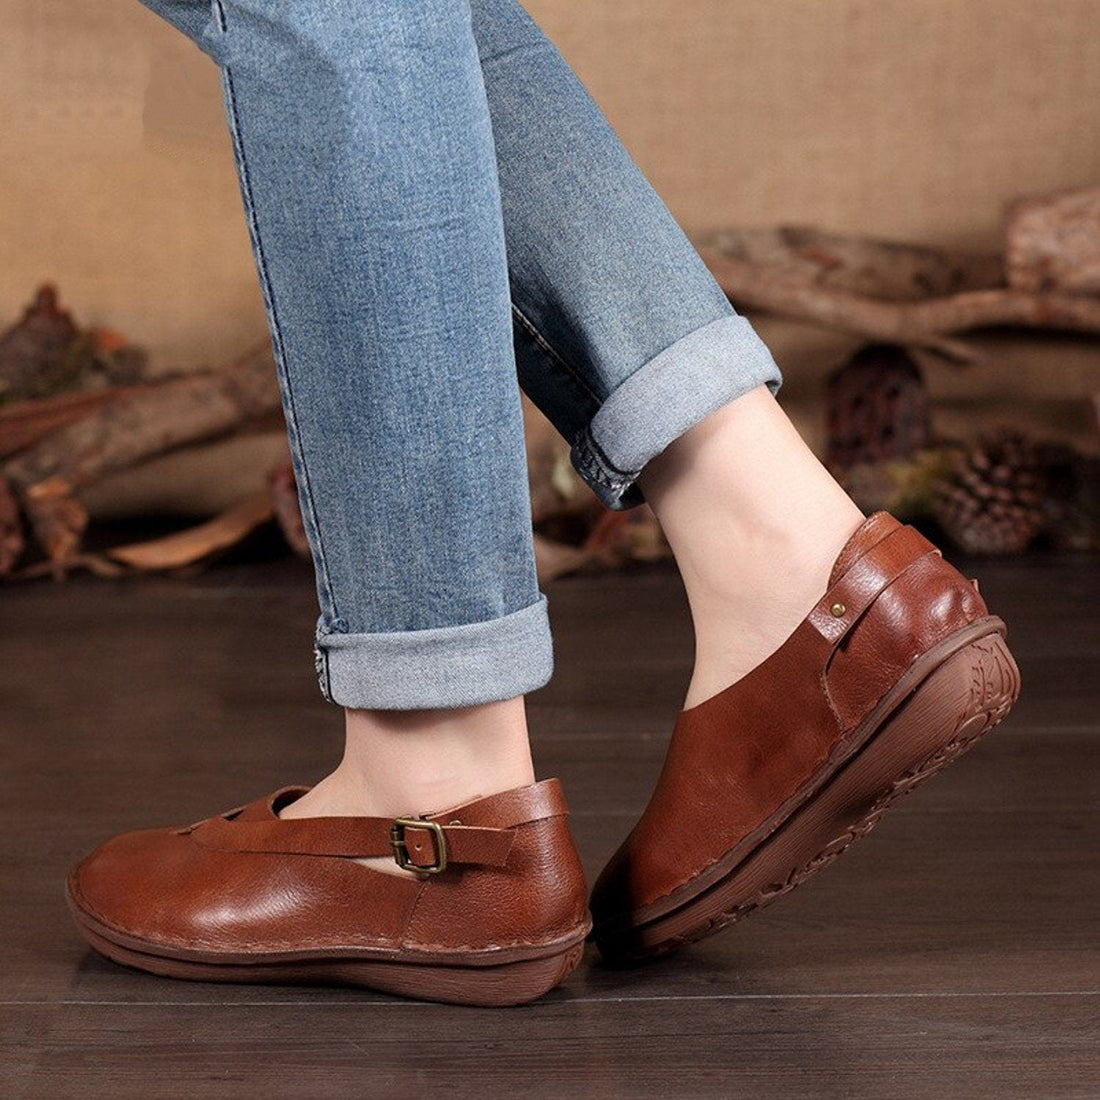 Women's Spring/Autumn Genuine Leather Casual Flats